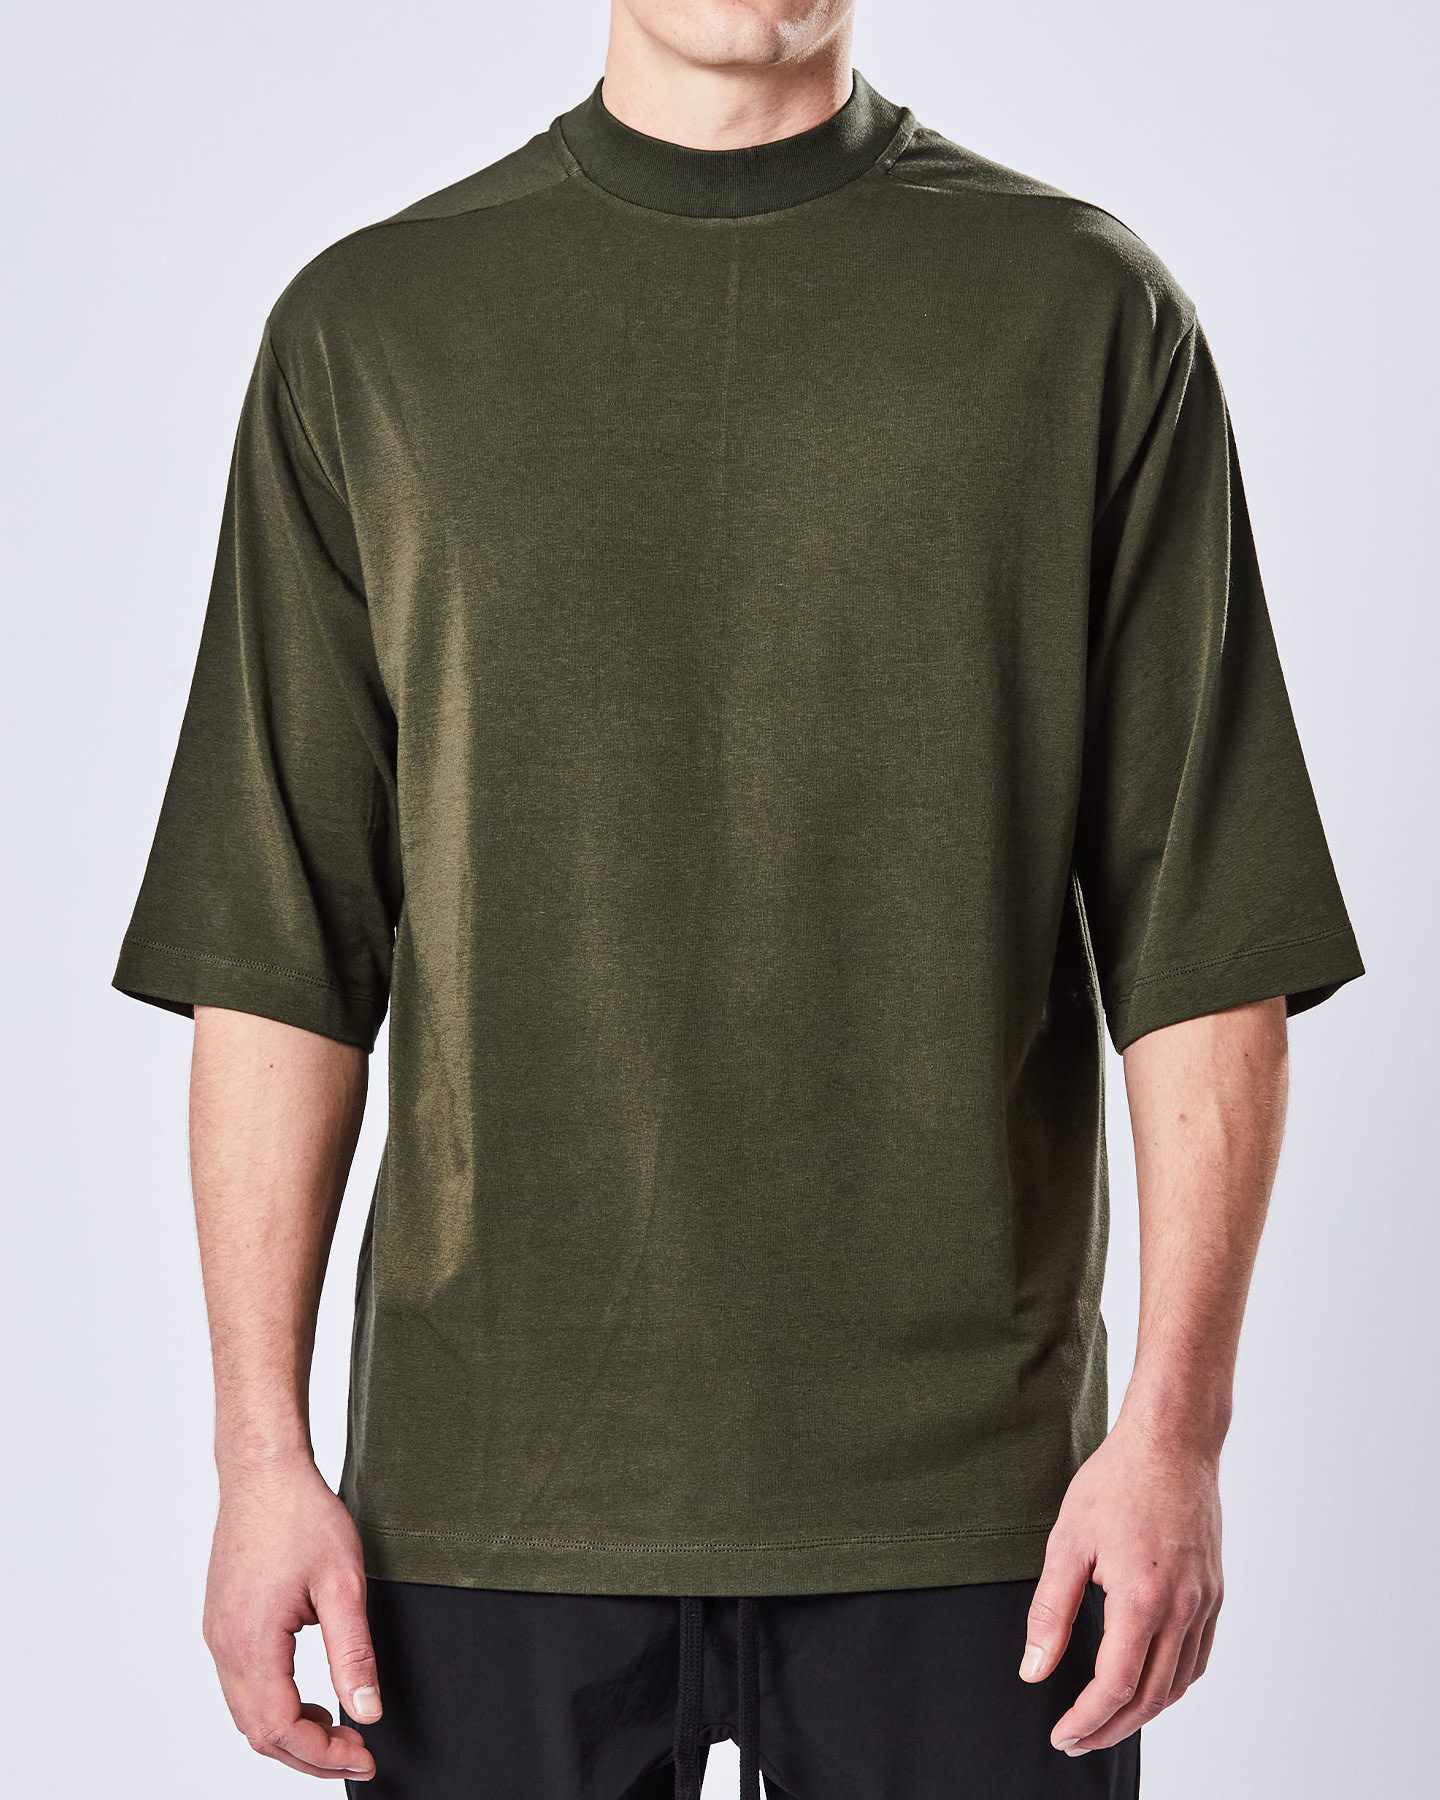 STRETCH COTTON & MODAL RELAXED FIT T-SHIRT - HUNT GREEN